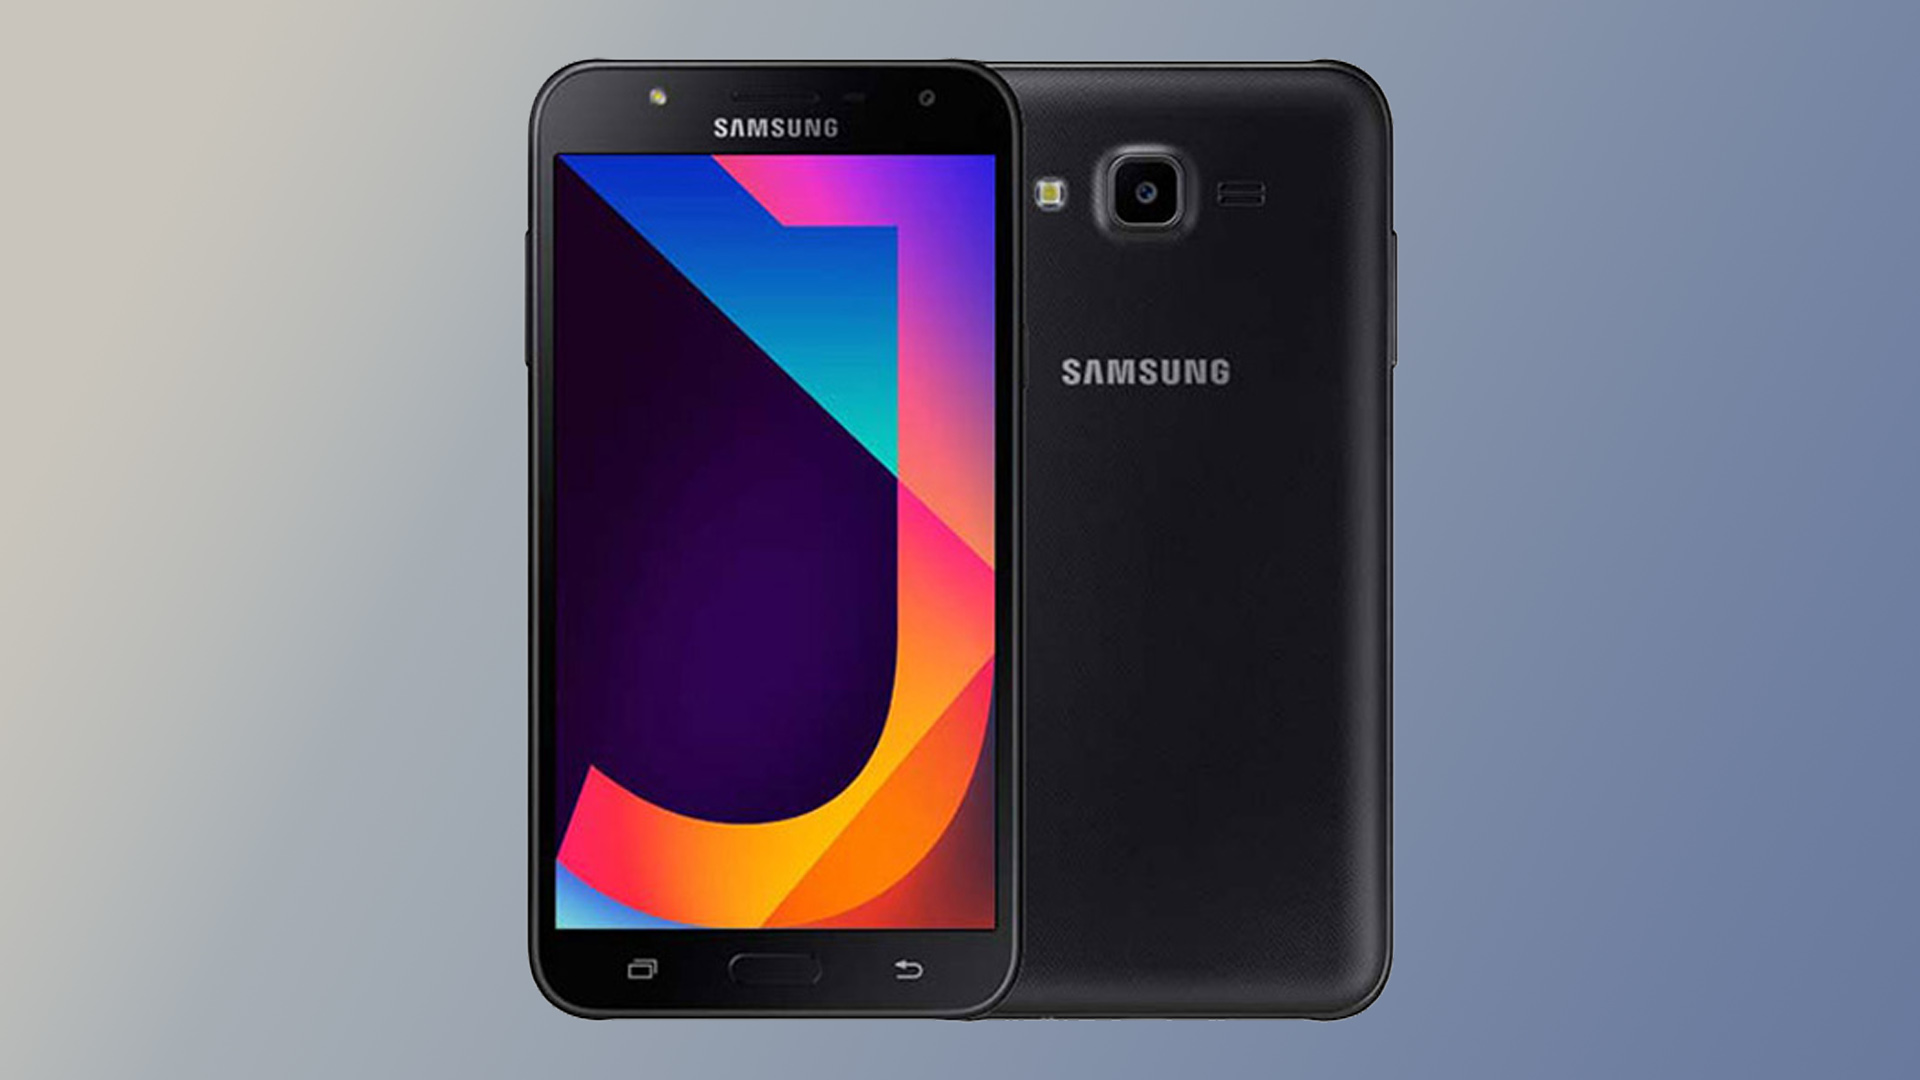 Samsung Galaxy J7 Nxt 32GB launched in Nepal